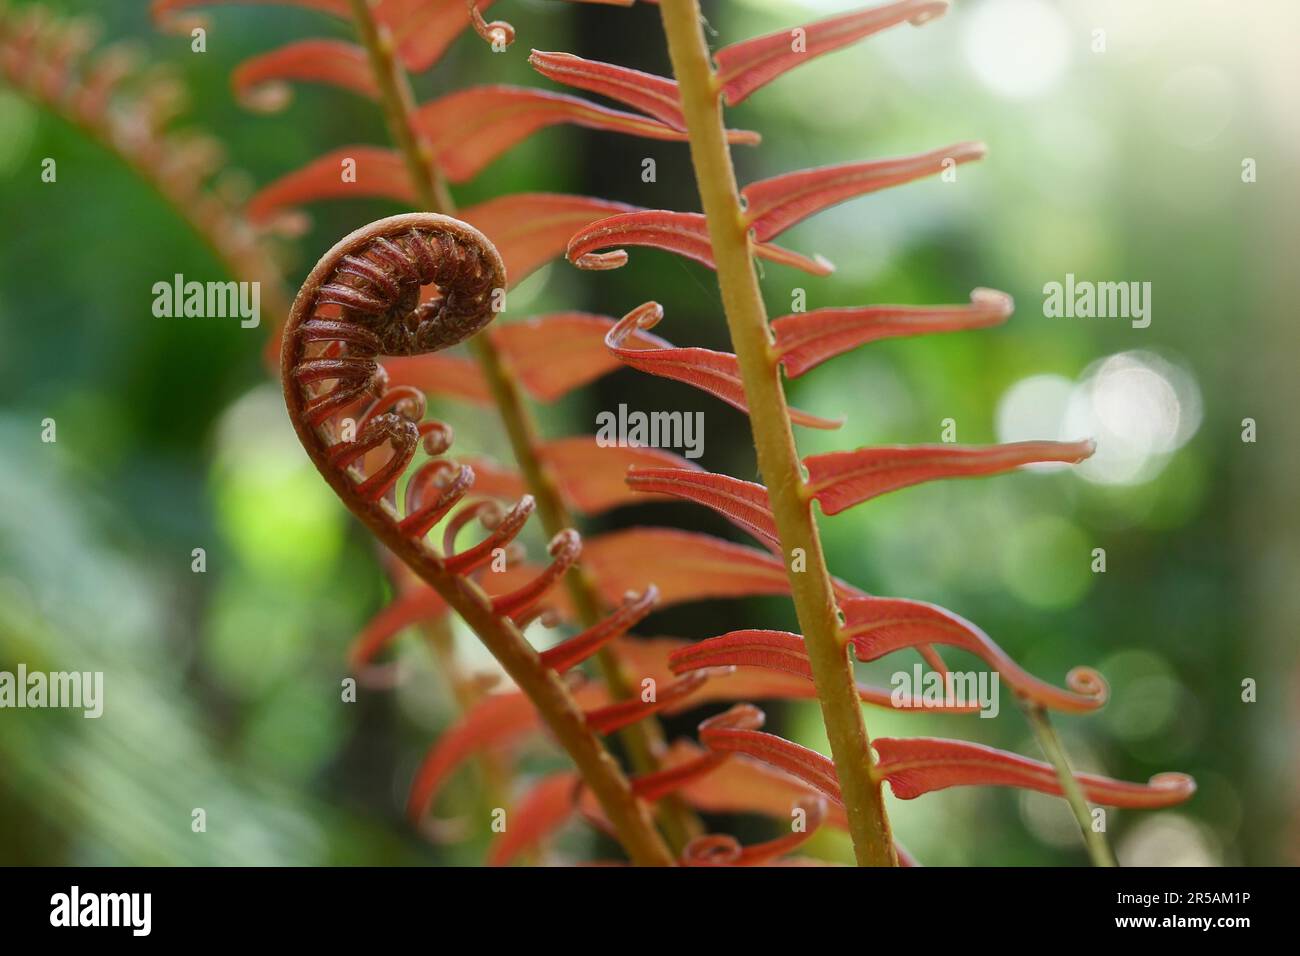 Fern leaves in tropical rainforest. Stock Photo